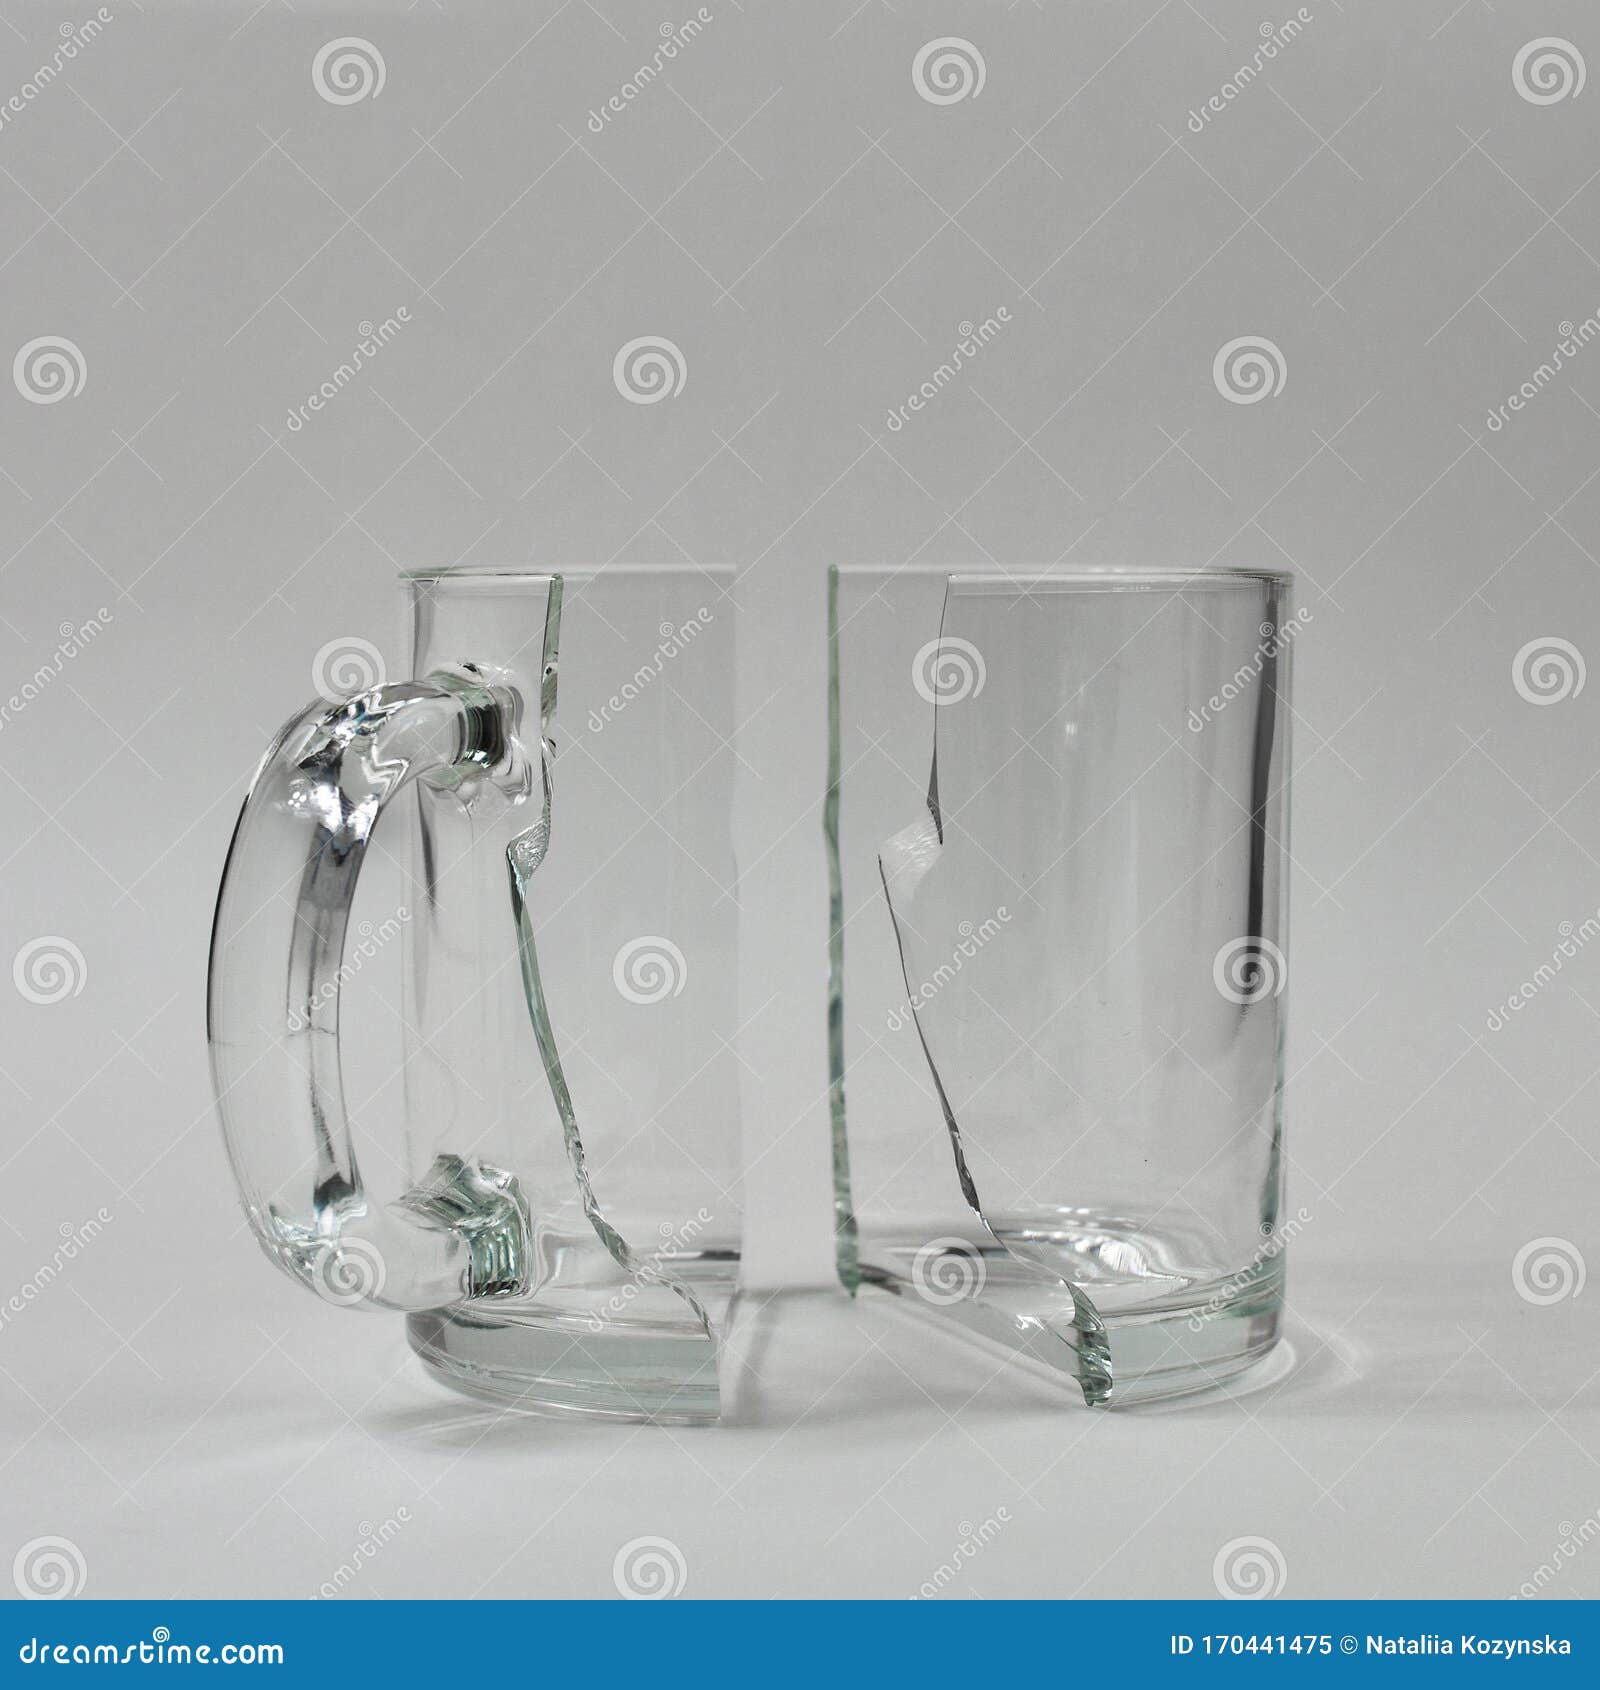 6,396 Broken Glass Cup Royalty-Free Images, Stock Photos